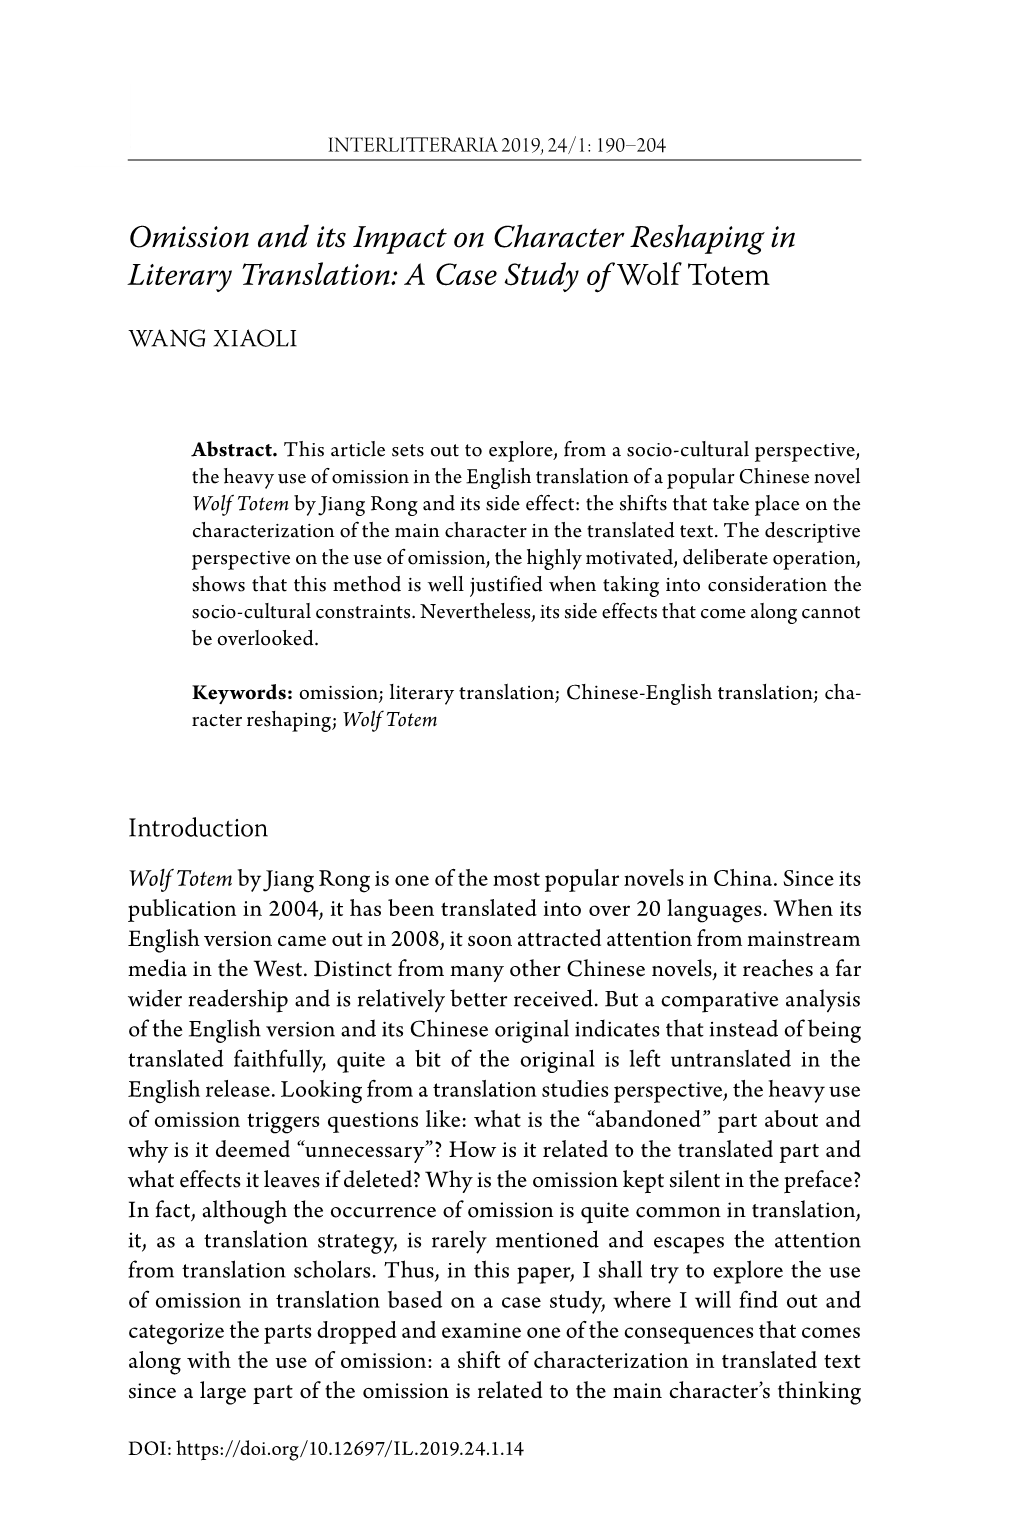 A Case Study of Wolf Totem